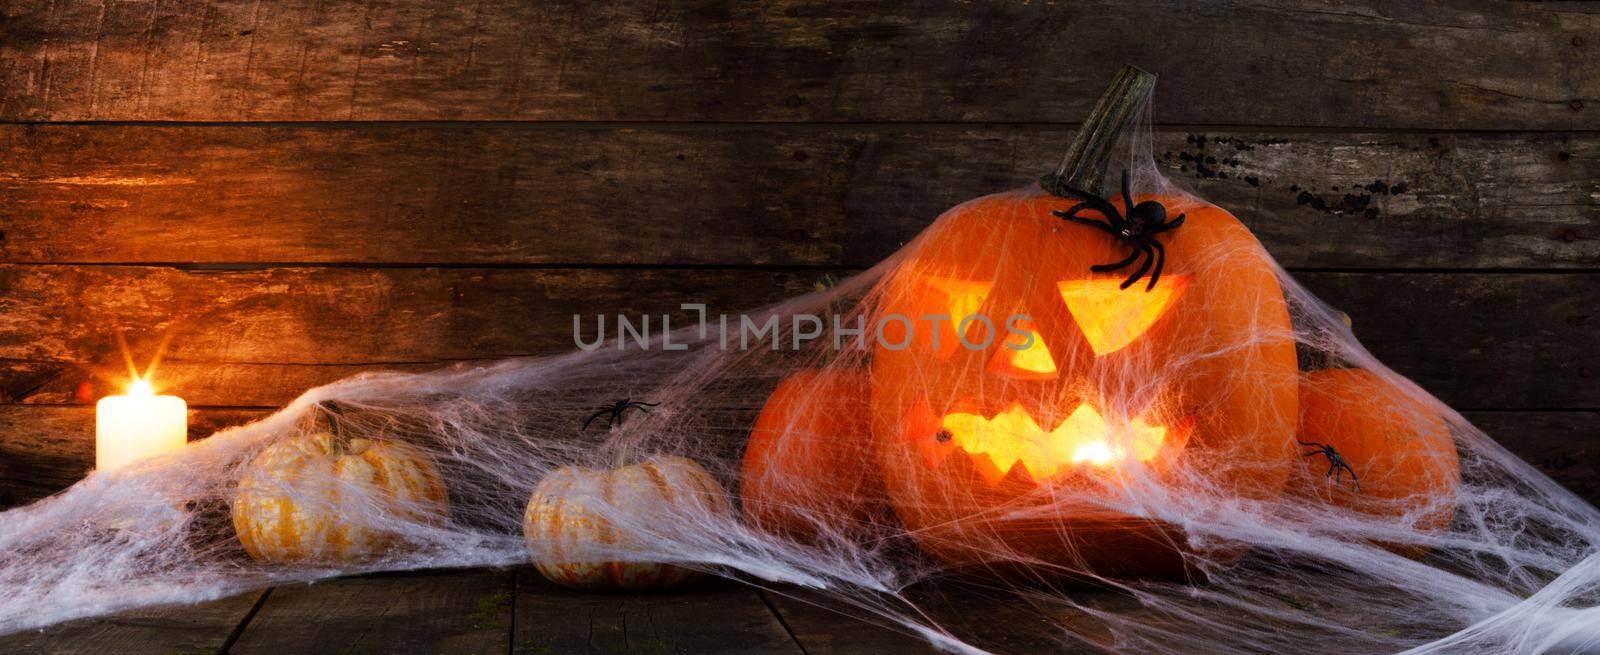 Halloween, decorations and holidays concept - pumpkins with spiders, web and candles